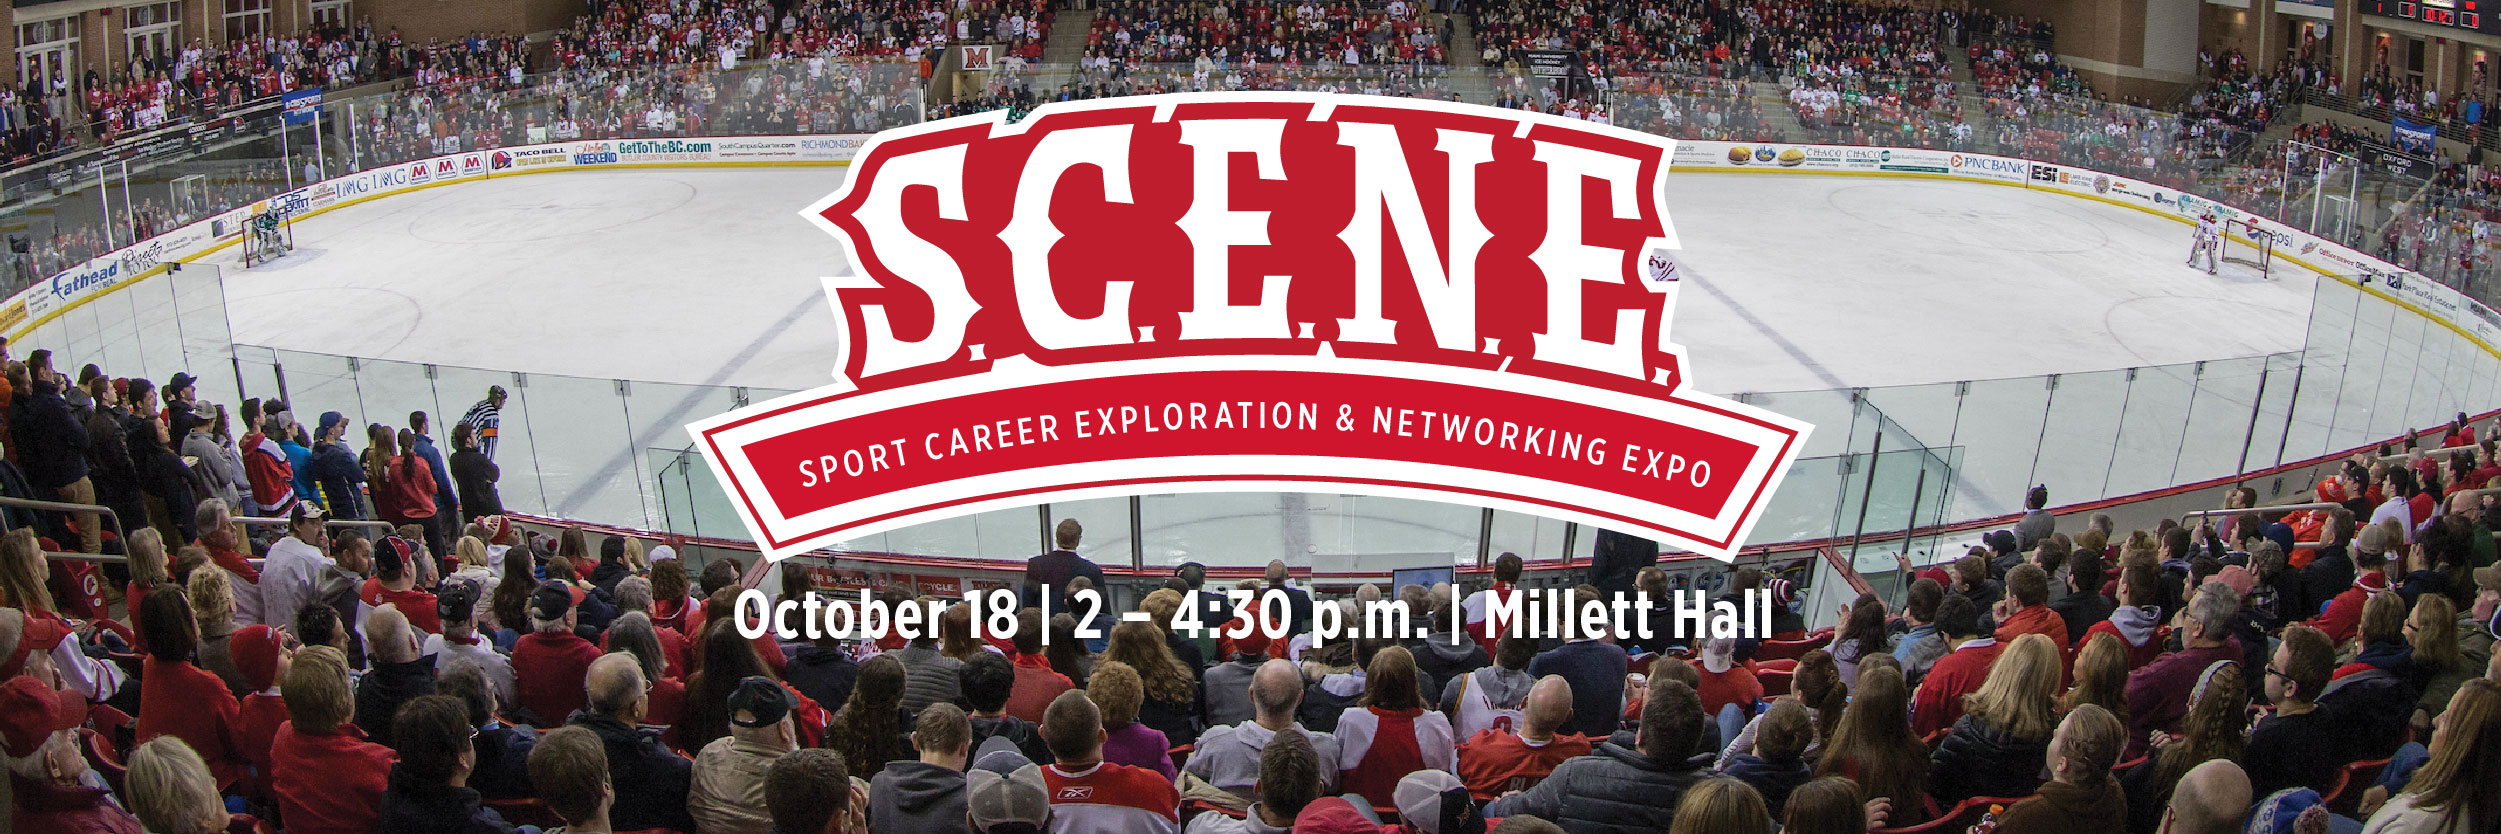 The Sport Career Exploration and Networking Expo will be held on October 18 from 2 – 4:30 p.m.